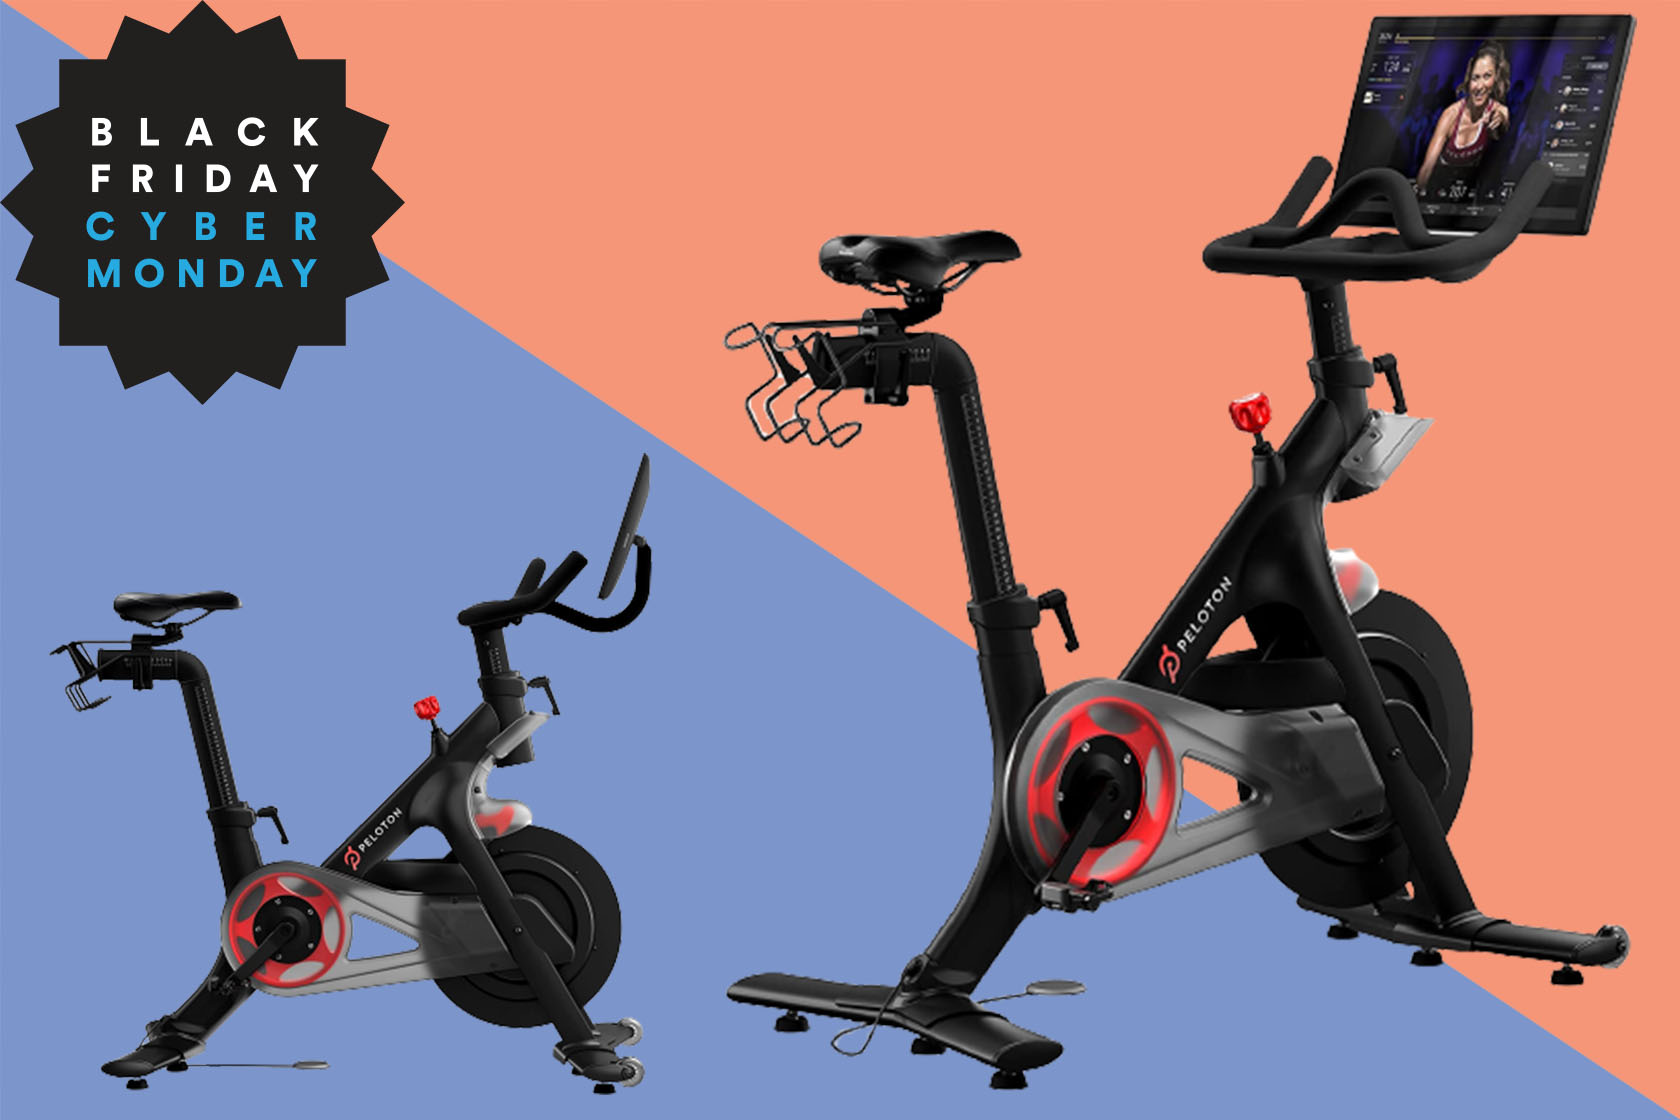 The Original Peloton Bike is at its lowest price ever on